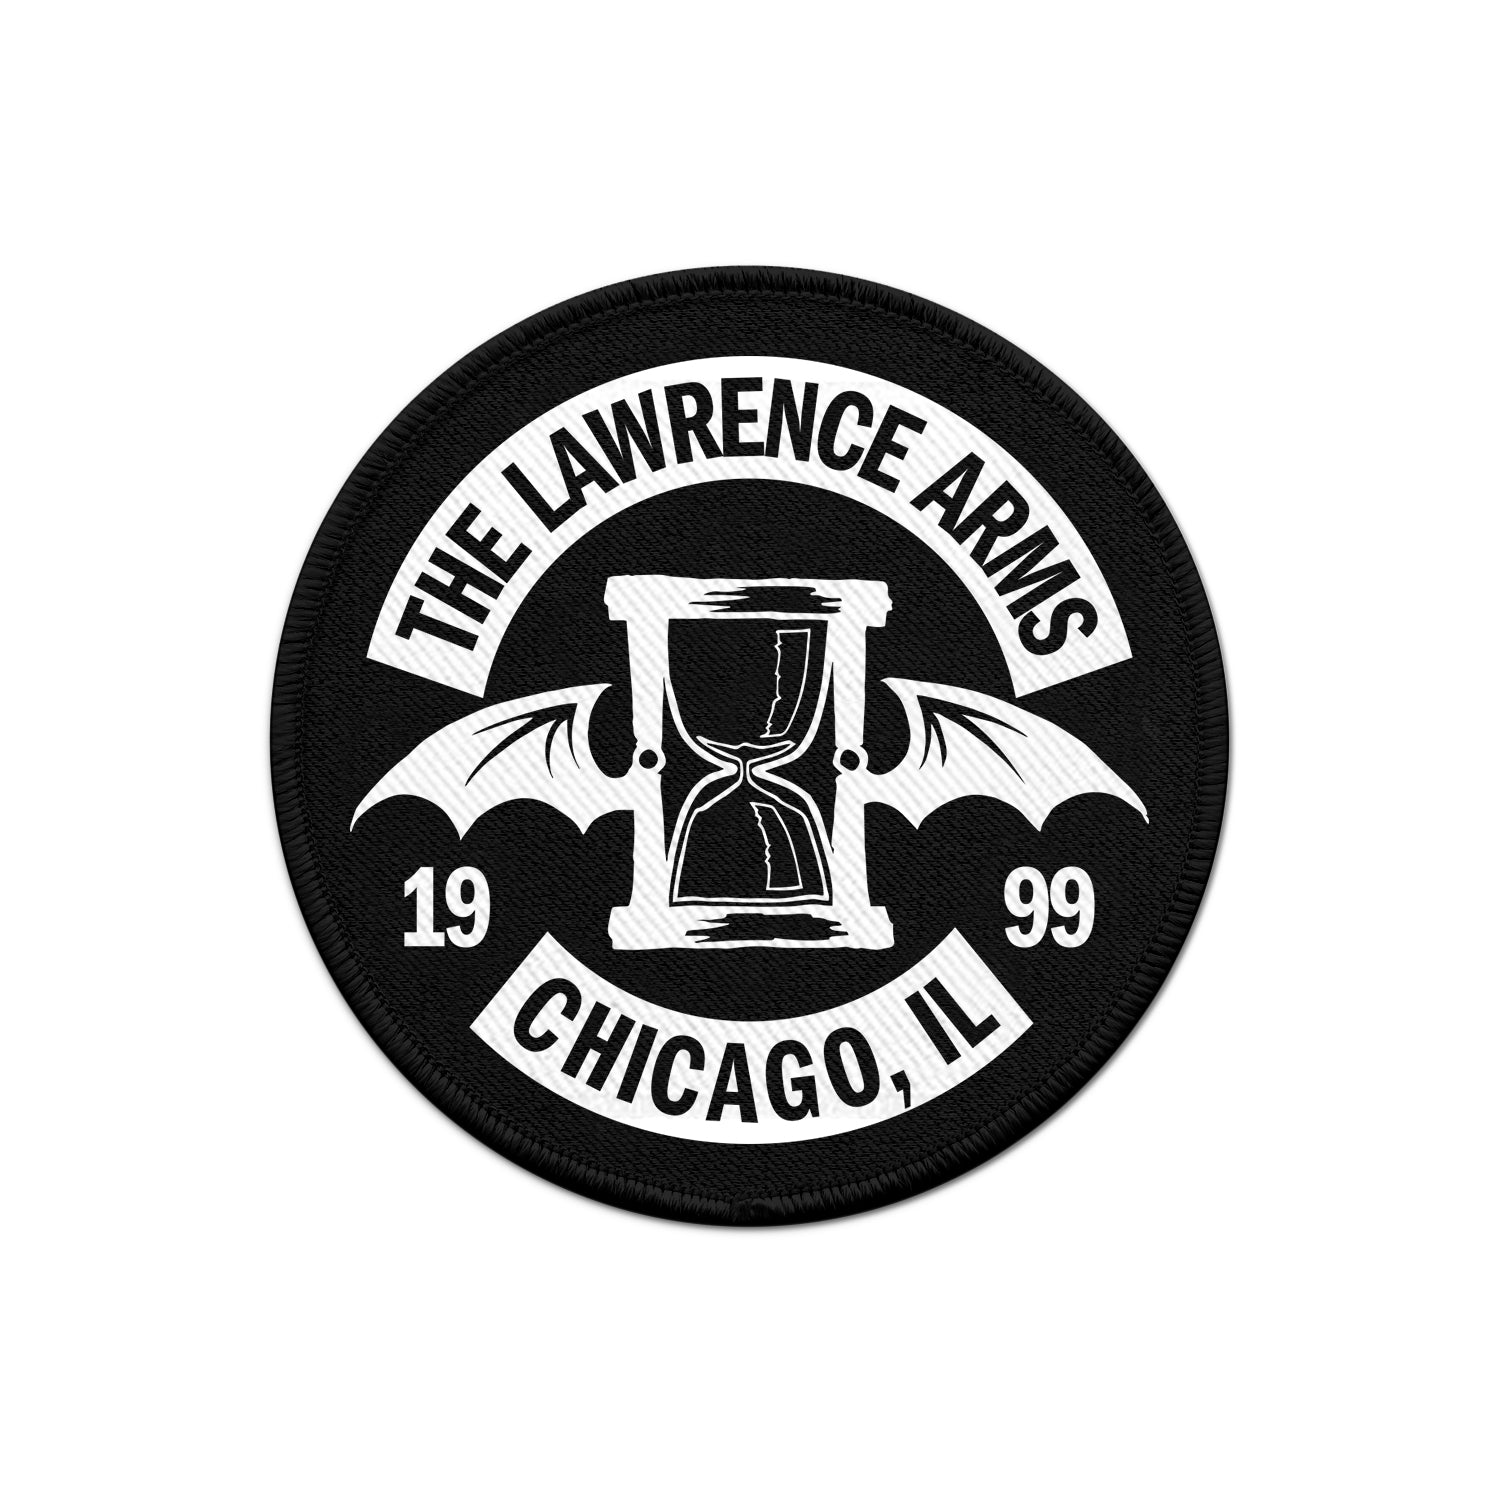 Image of a black and white embroidered patch against a white background. The patch is black and the center of it features the lawrence arms logo of an hourglass with wings, in white. Just below that are the numbers 1999. Above the logo in a banner says the lawrence arms. The banner is white with black text. Below the logo in the same style banner it says chicago, IL.